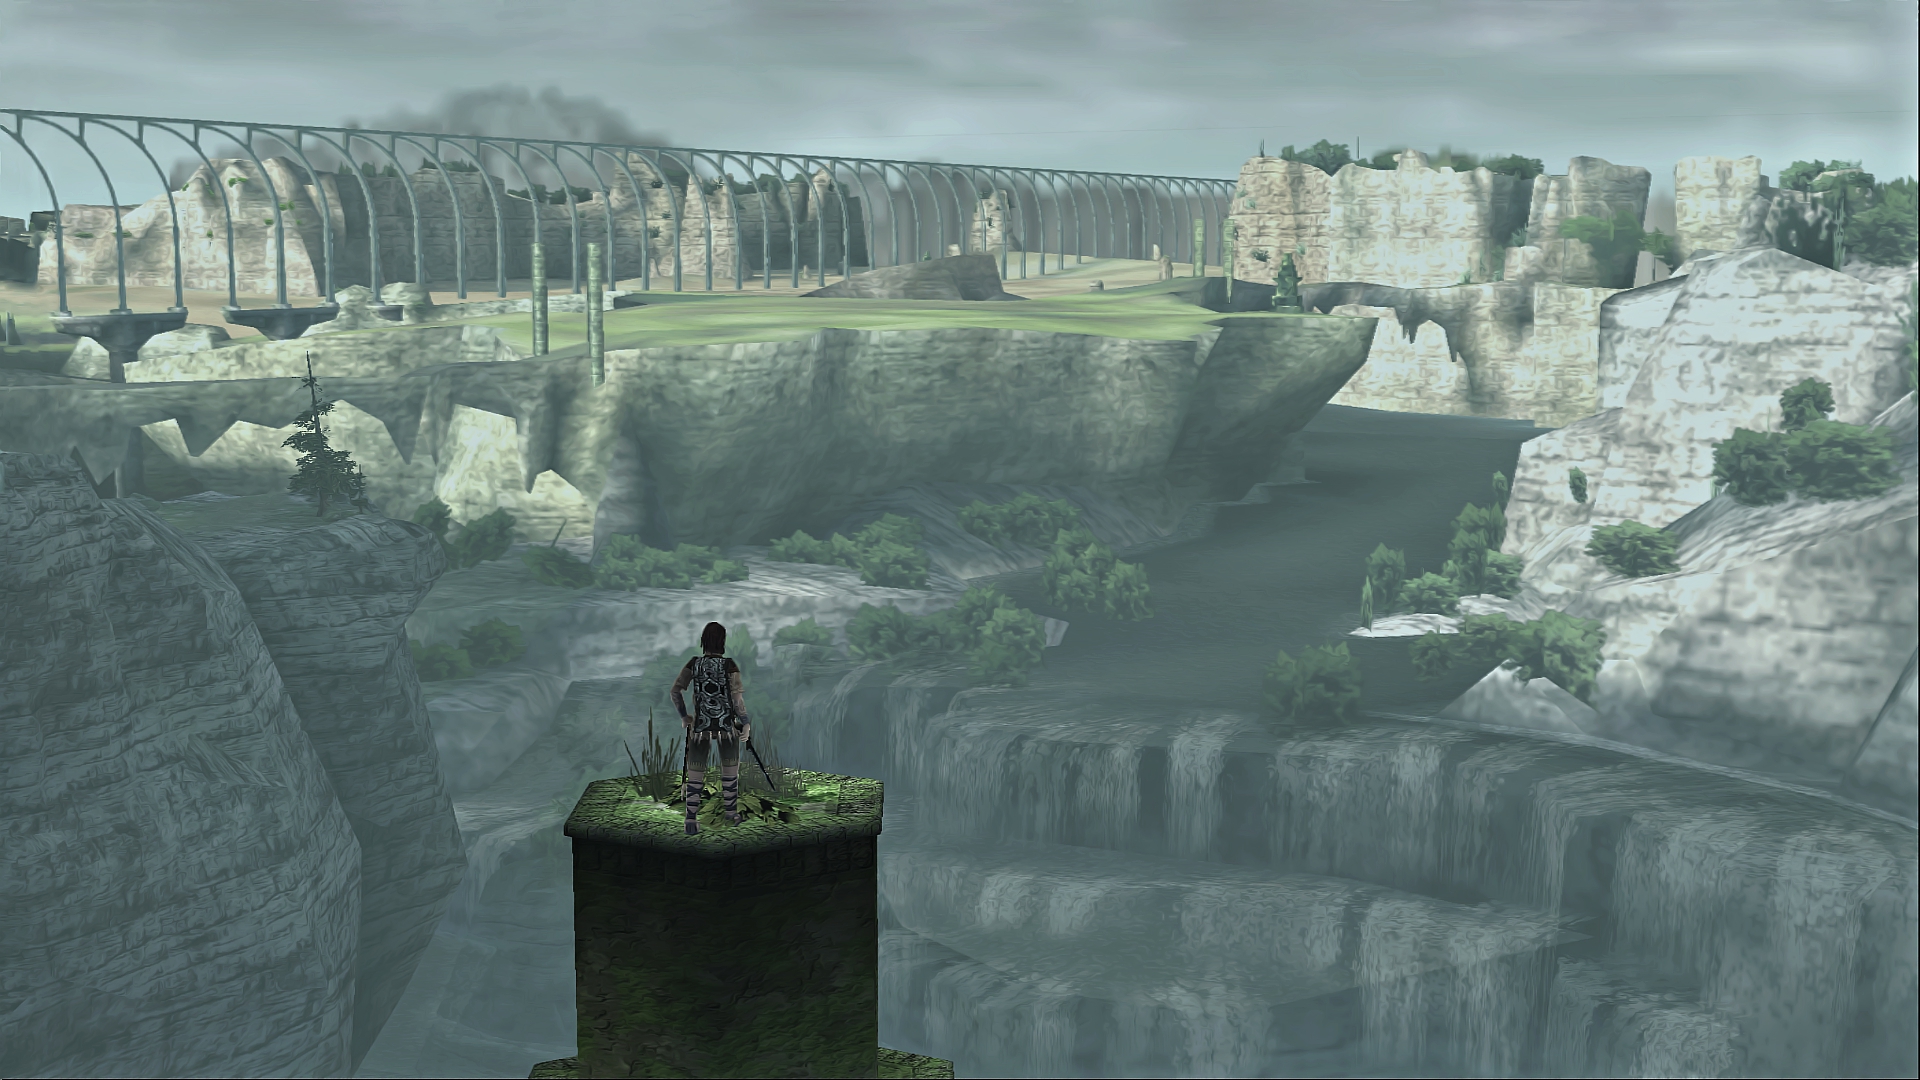 Shadow of the Colossus 3